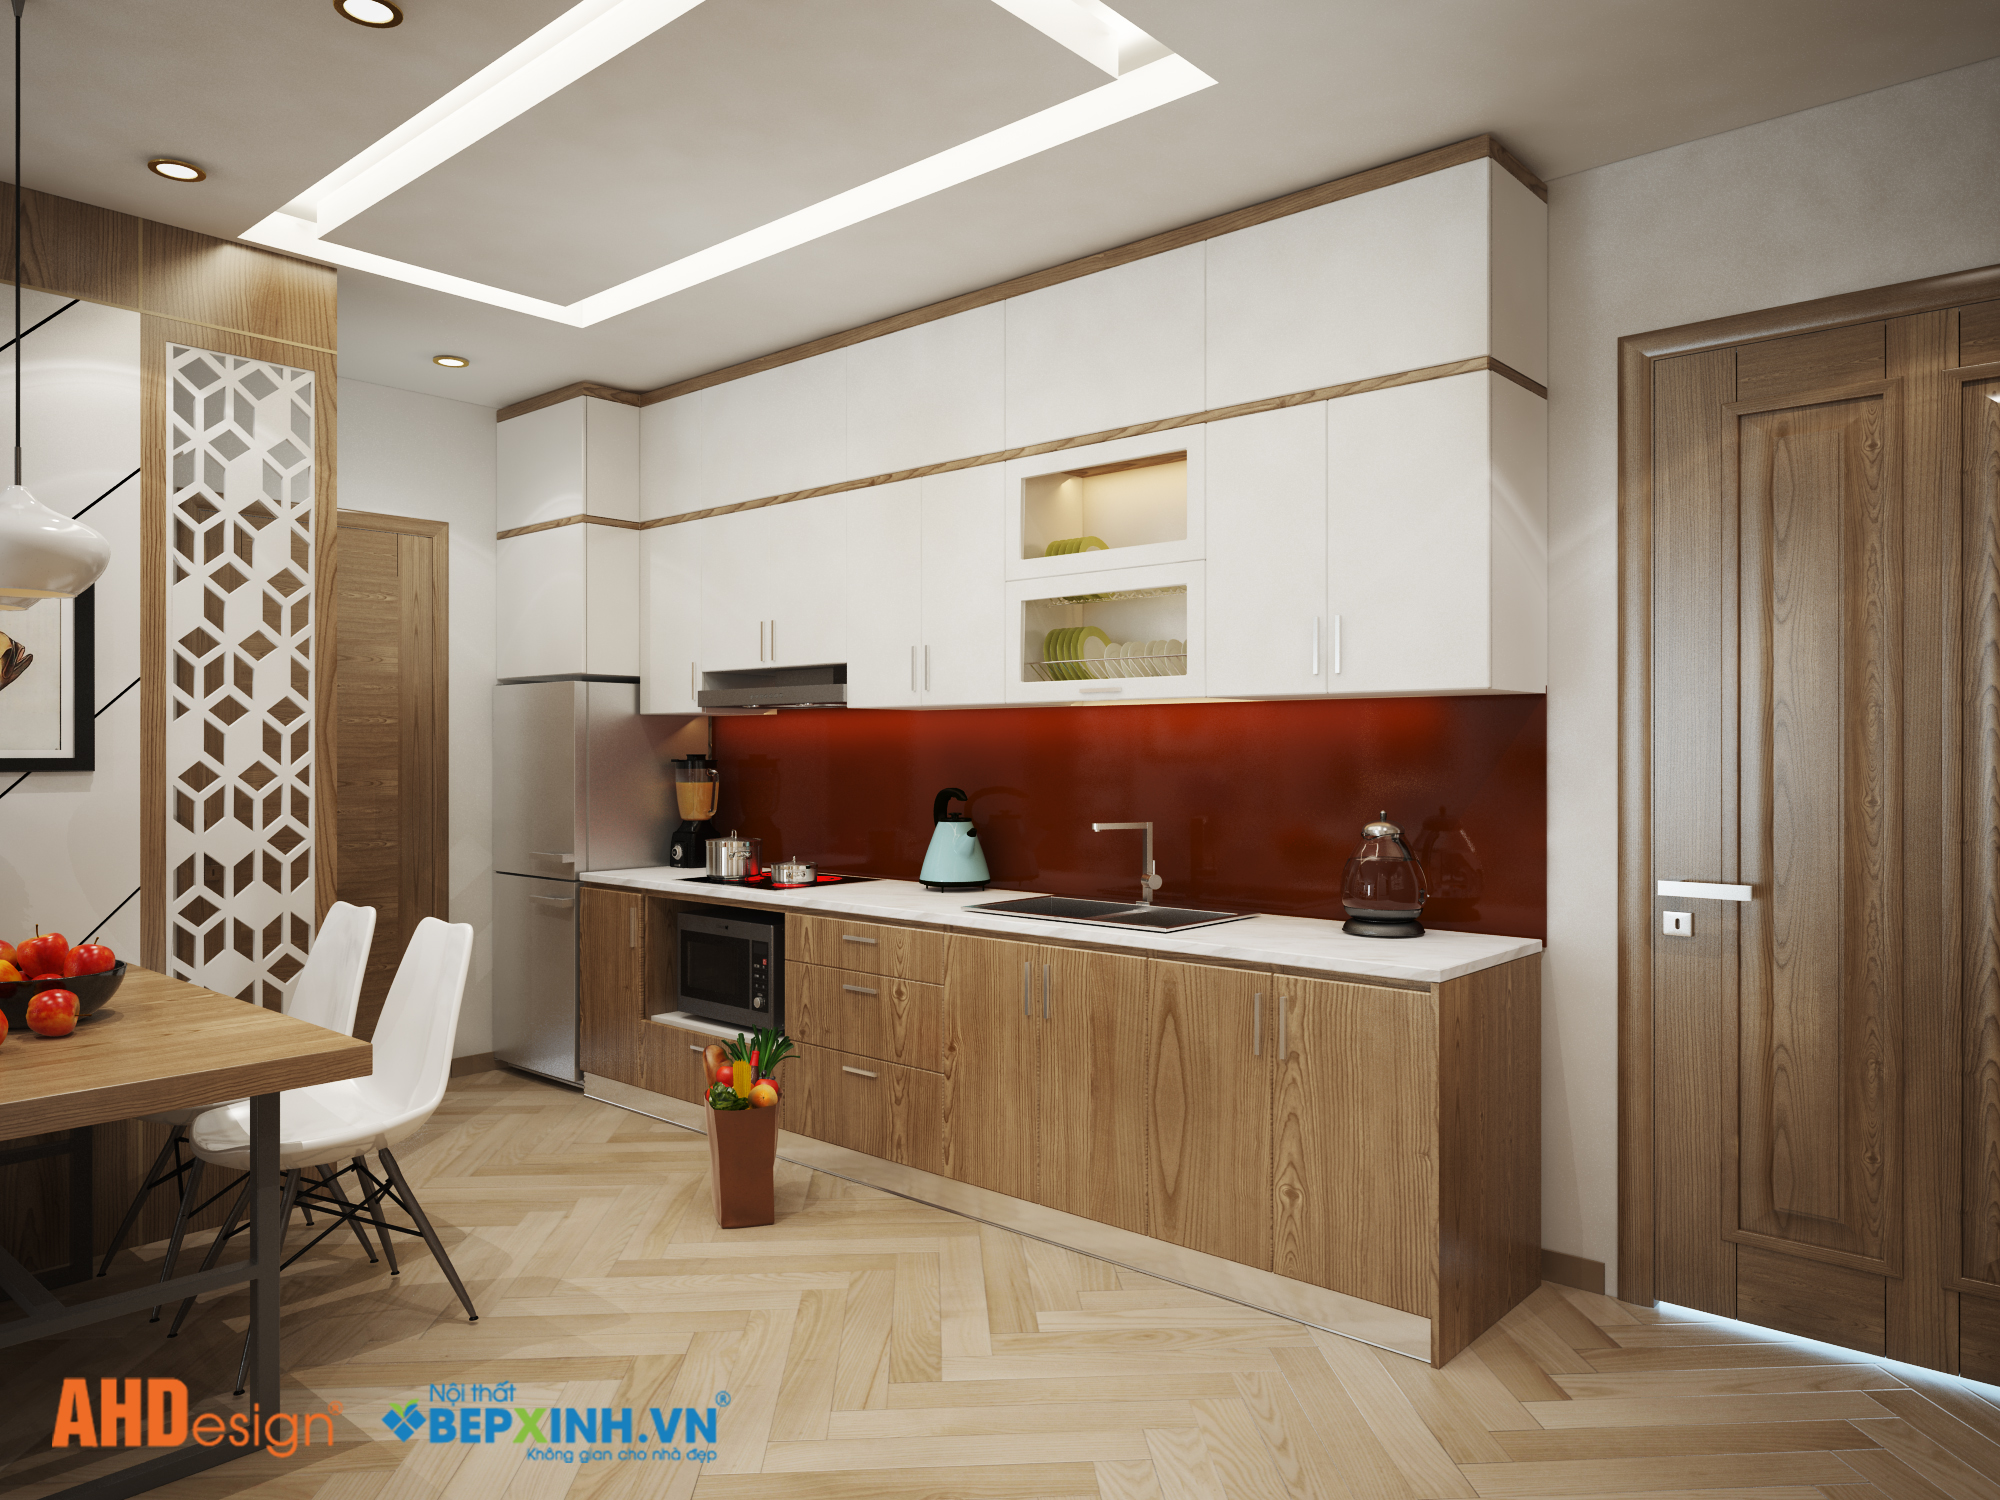 noi-that-can-ho-ecolife-75m2-khach-bep-4 